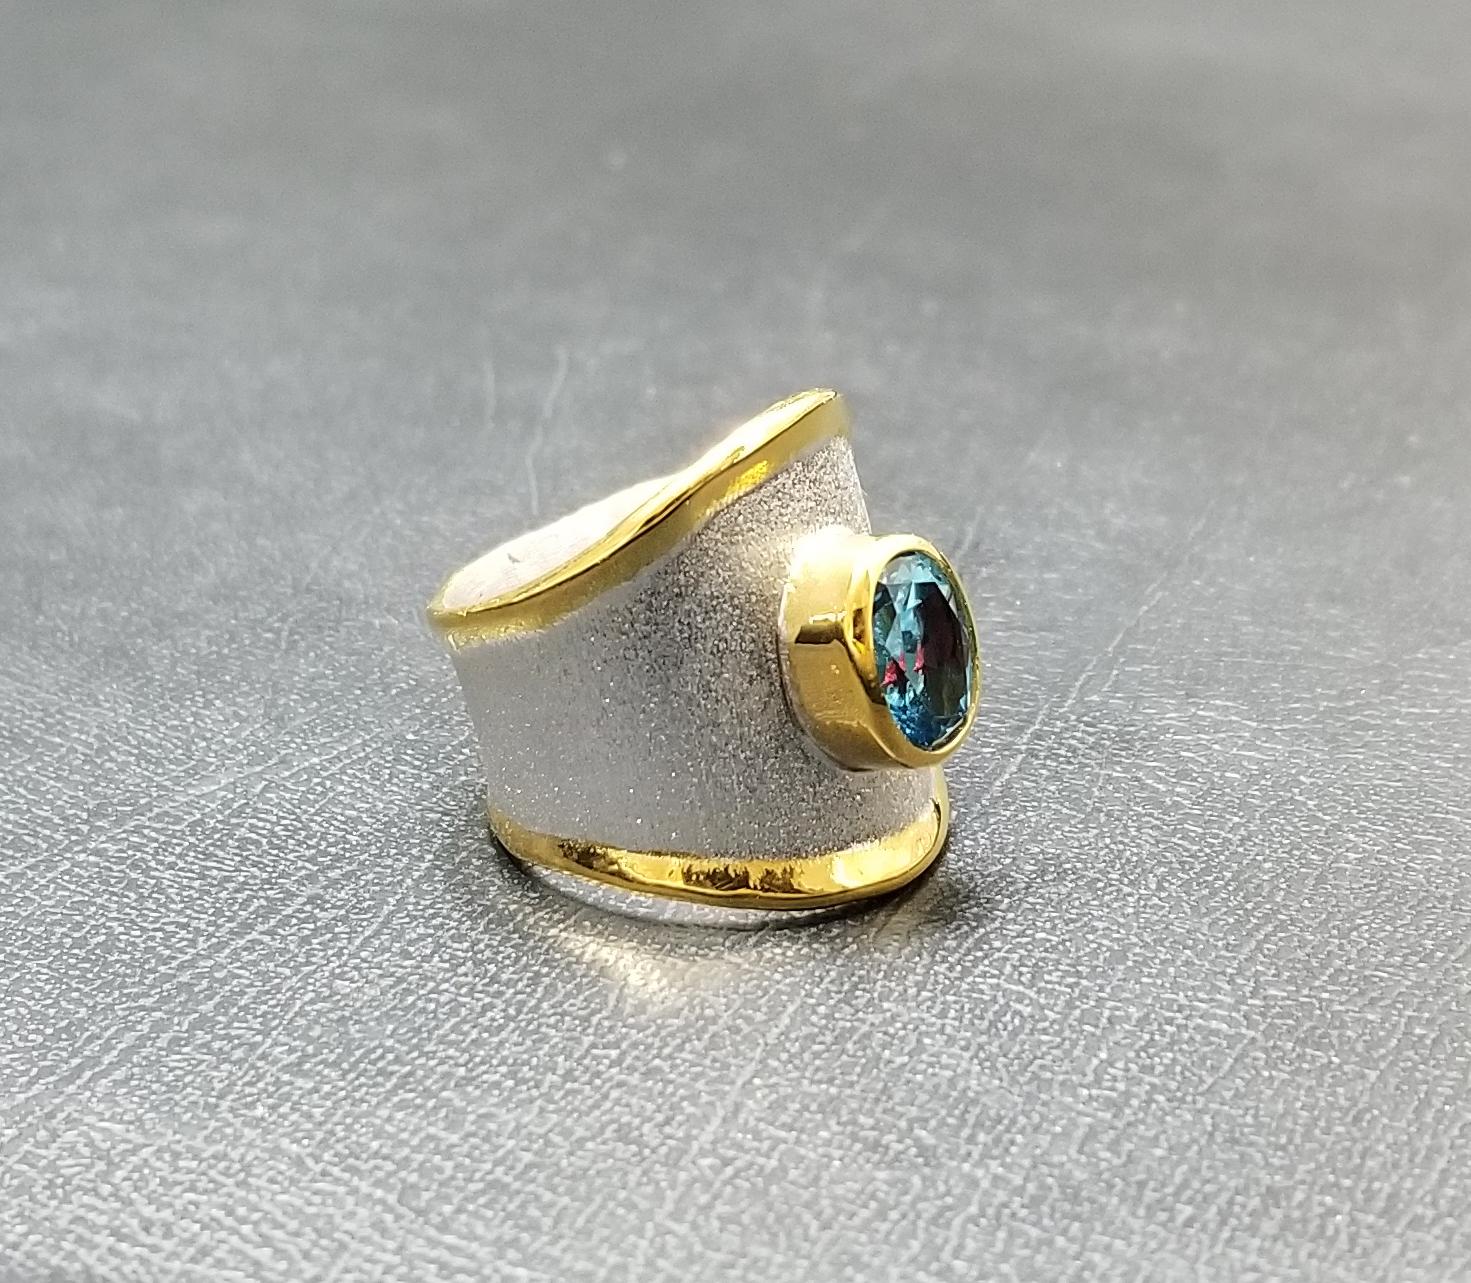 From Yianni Creations - Midas Collection this is a 950 purity fine silver ring handmade in Greece. The ring is plated with palladium to resist the elements and the liquid edges are decorated with an unusually thick 24 karat gold overlay of 3+